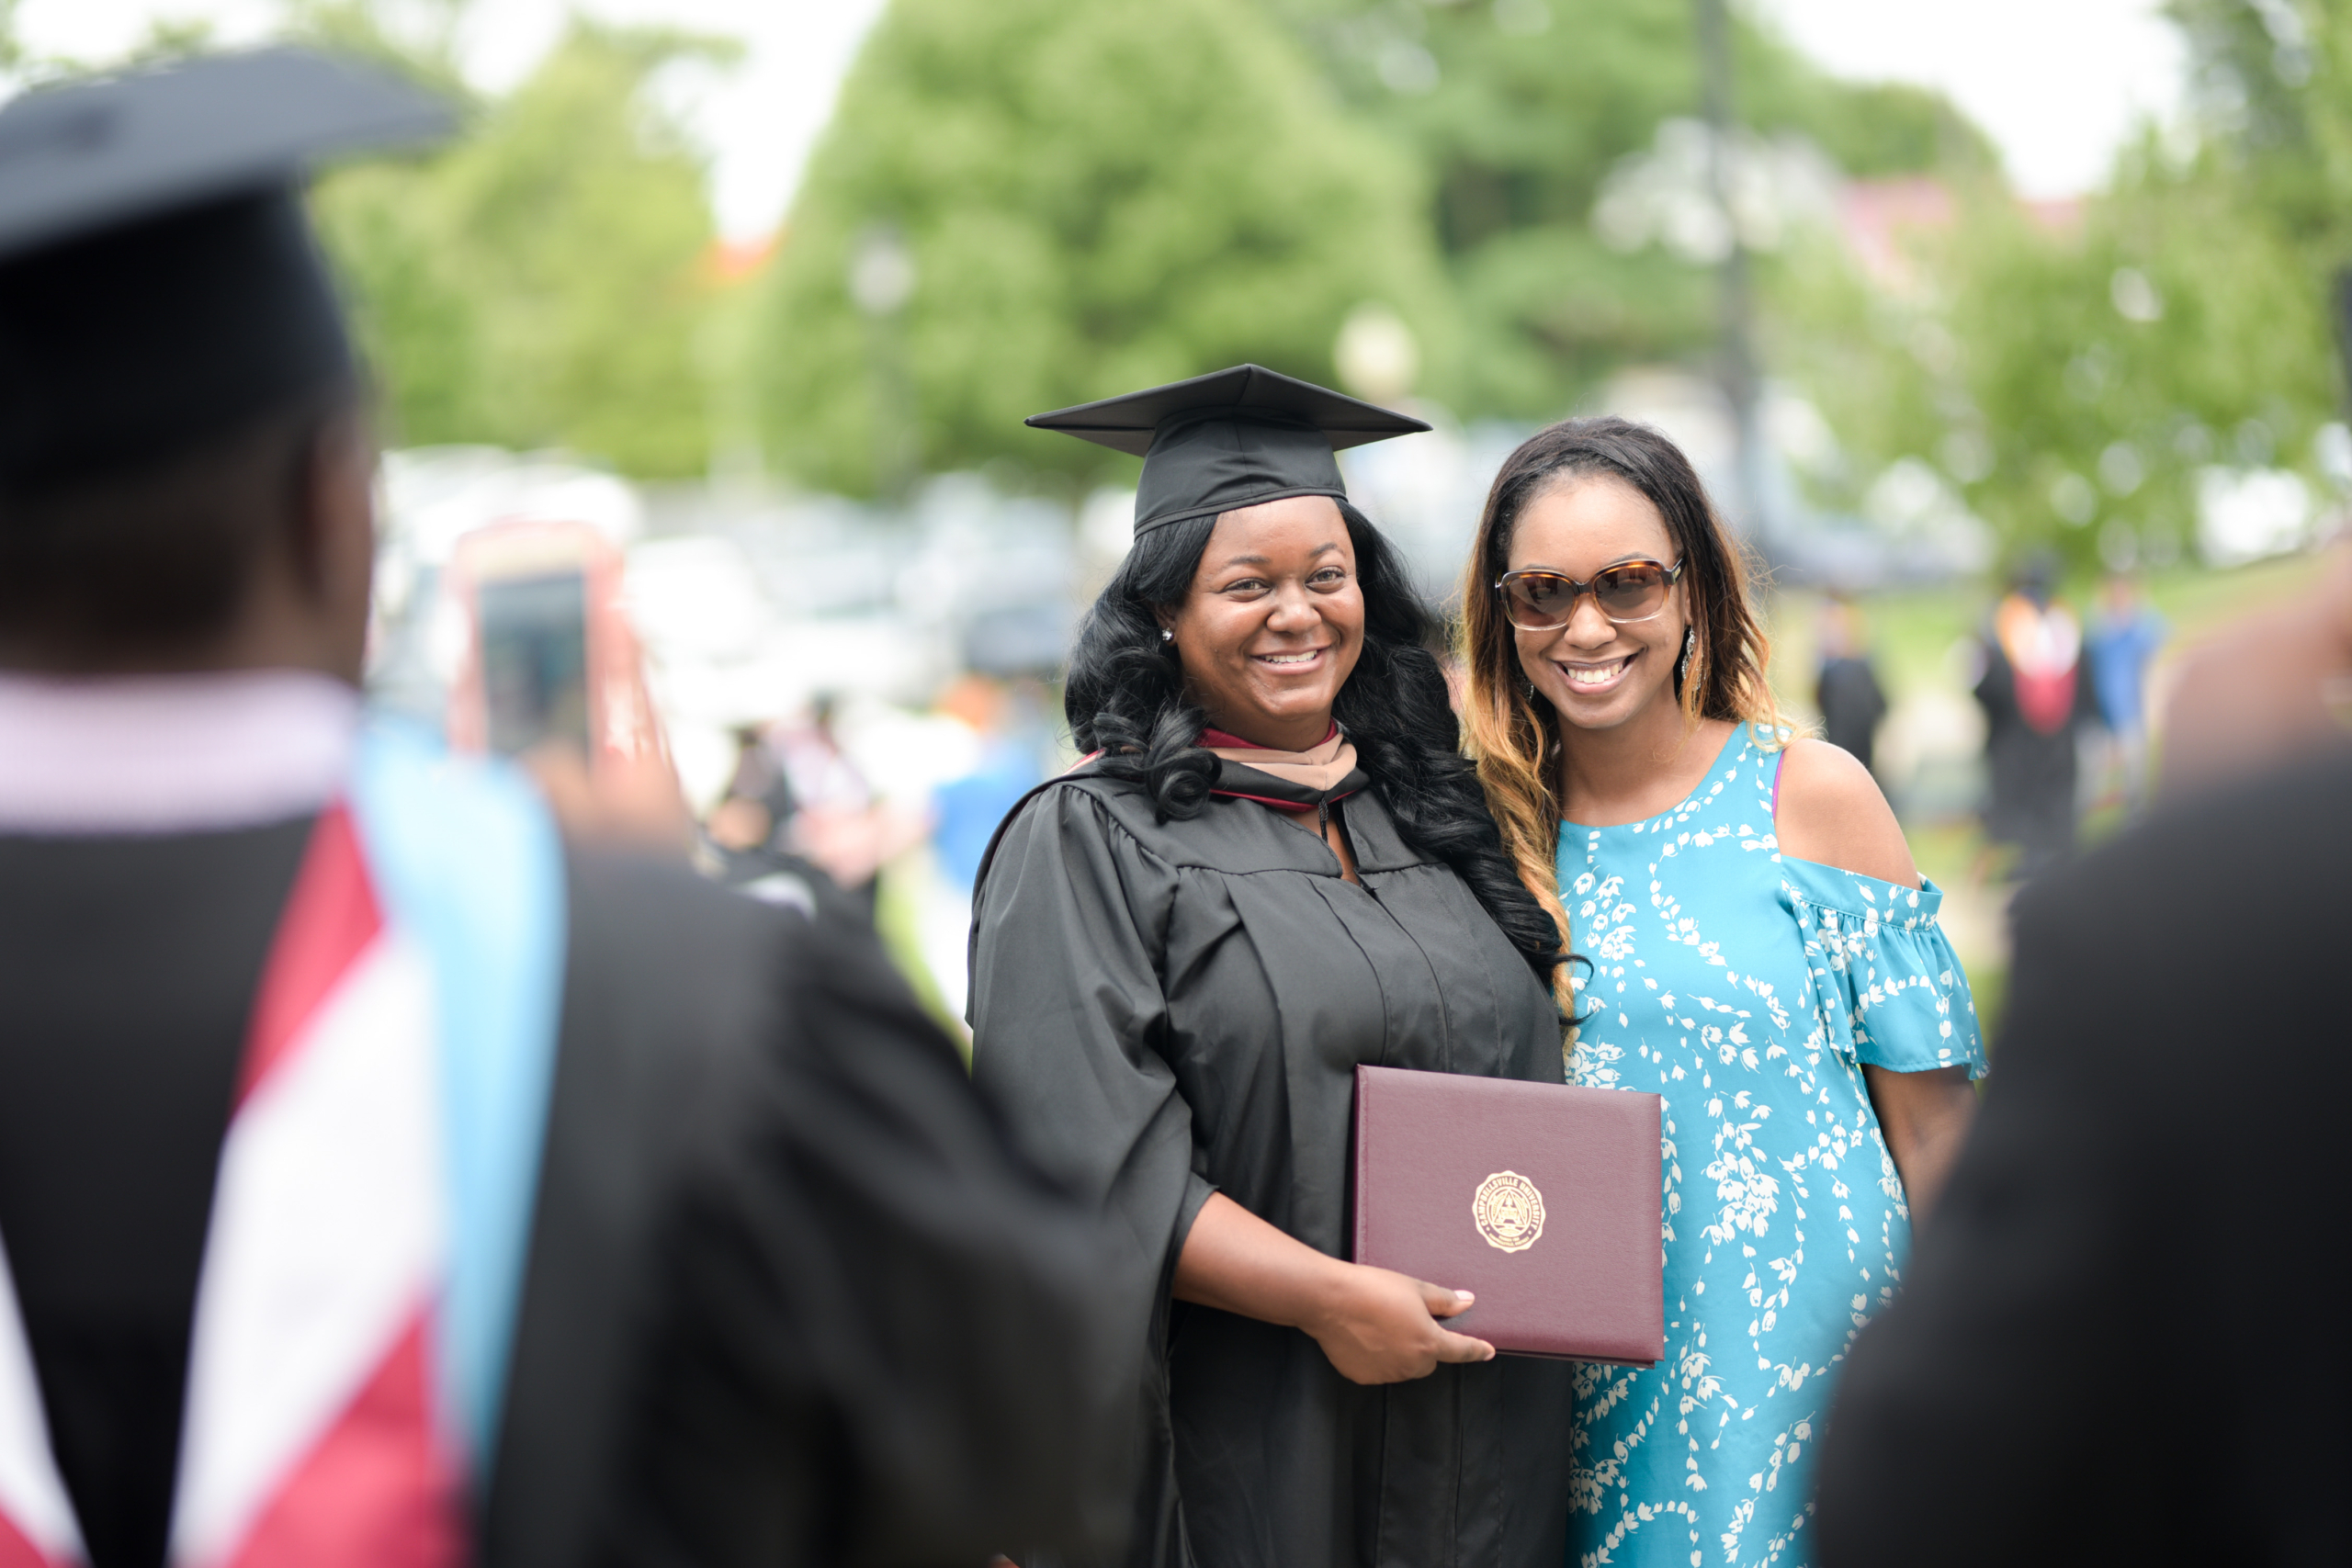 Campbellsville University graduates first August class; 1,286 for academic year 2